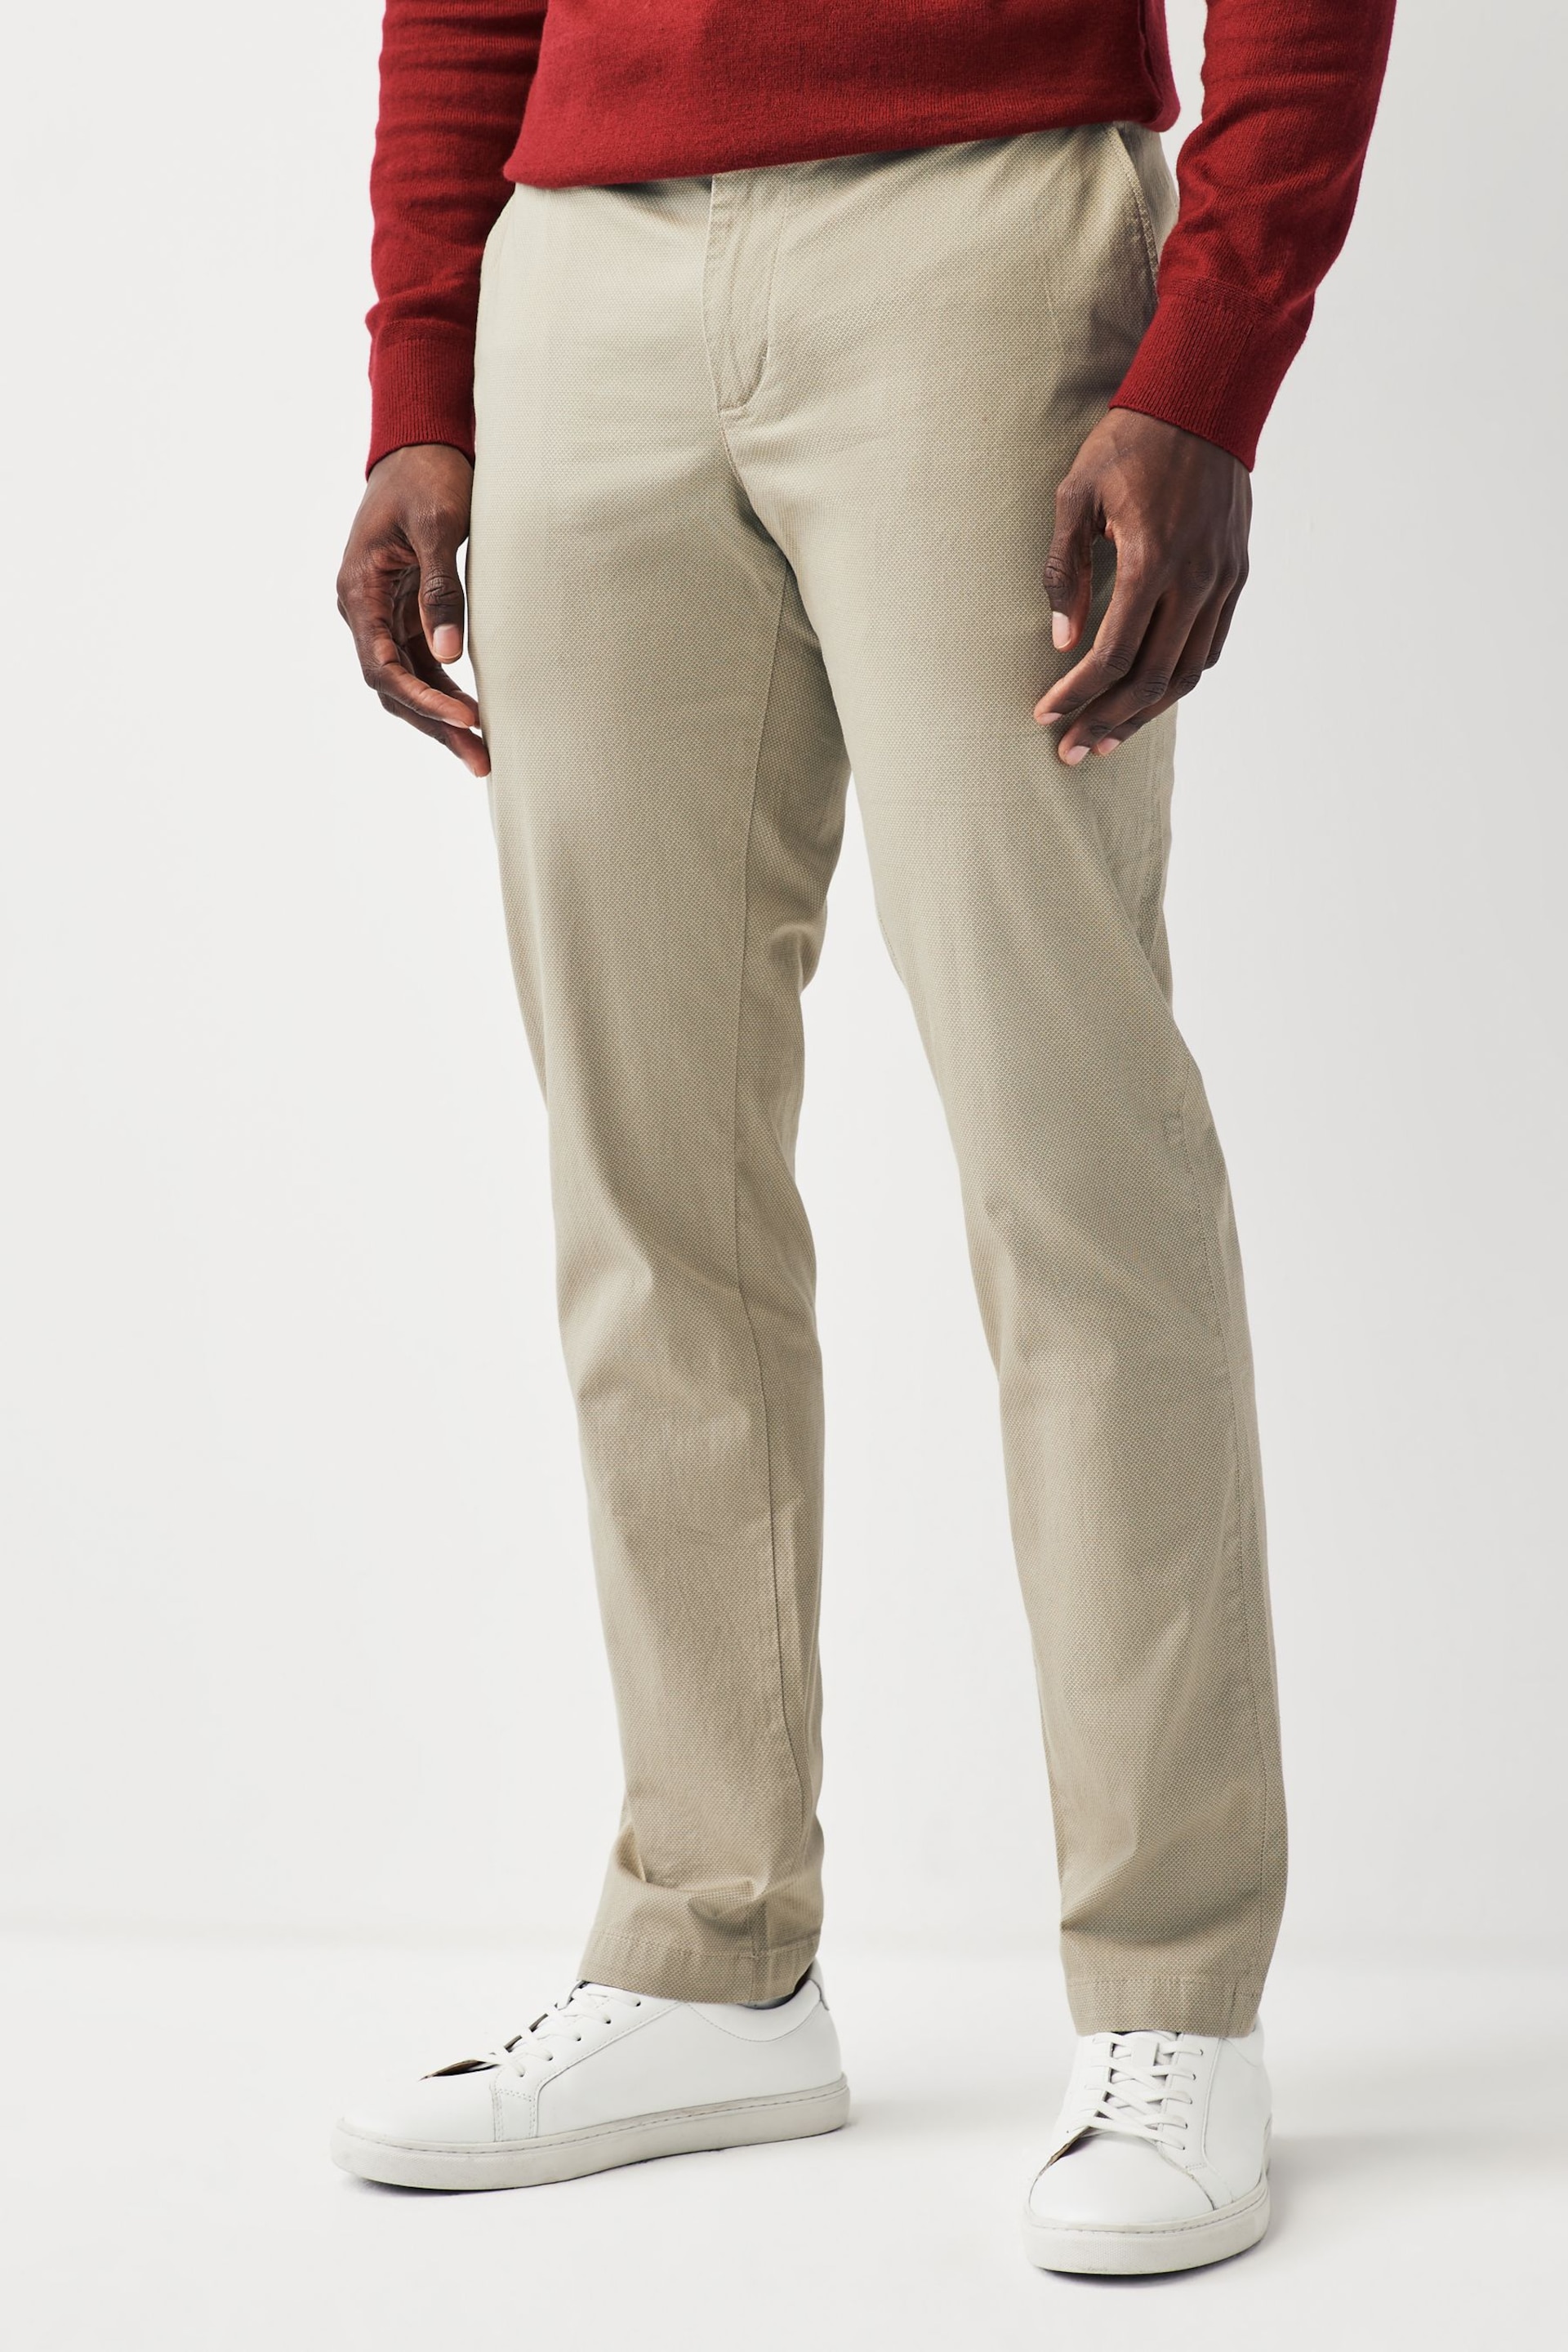 Tommy Hilfiger Denton Structure Chino Brown Trousers - Image 1 of 5